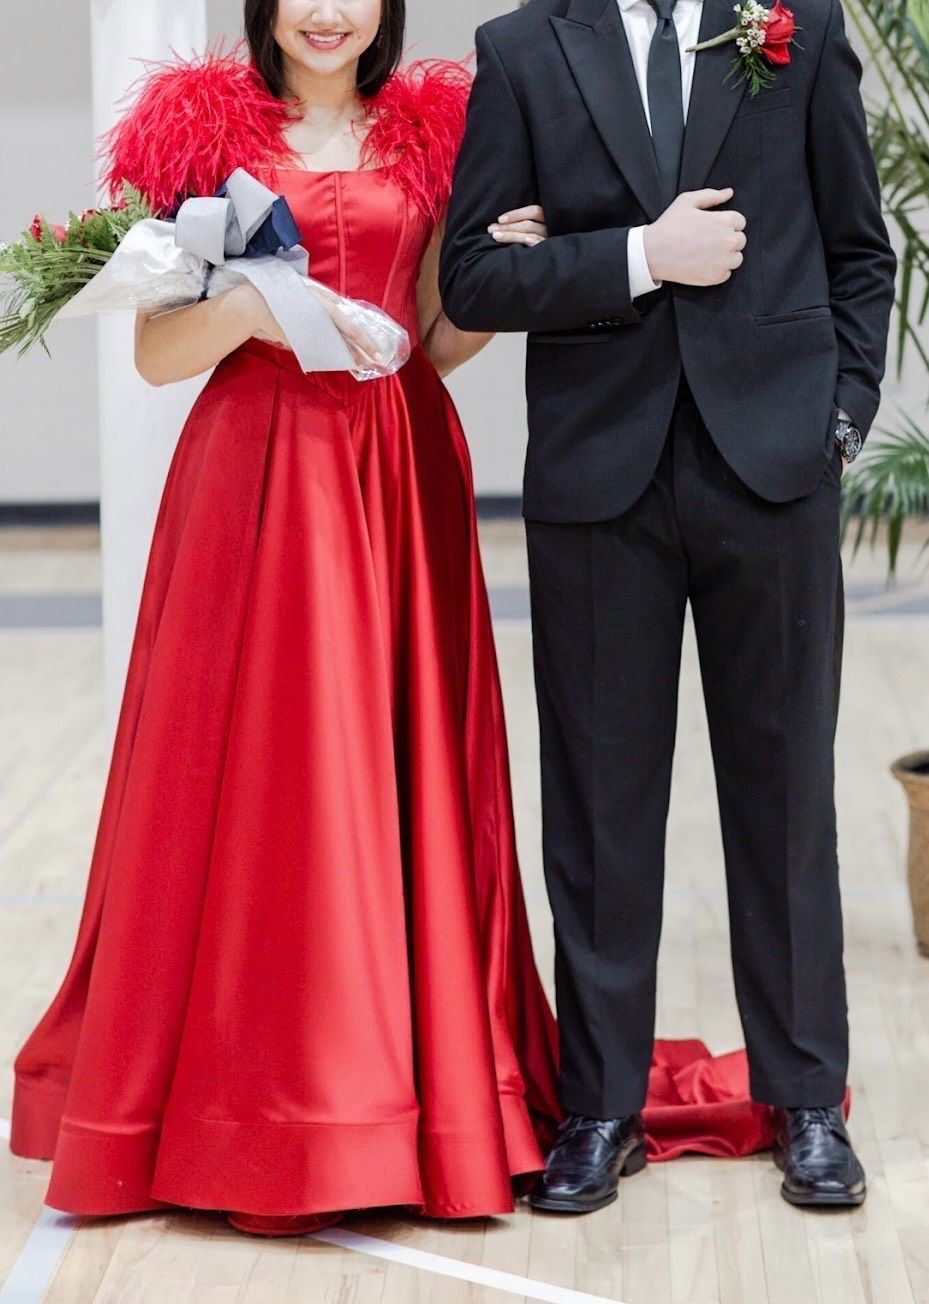 Style 22548 Portia and Scarlett Size 4 Prom Cap Sleeve Red Ball Gown on Queenly